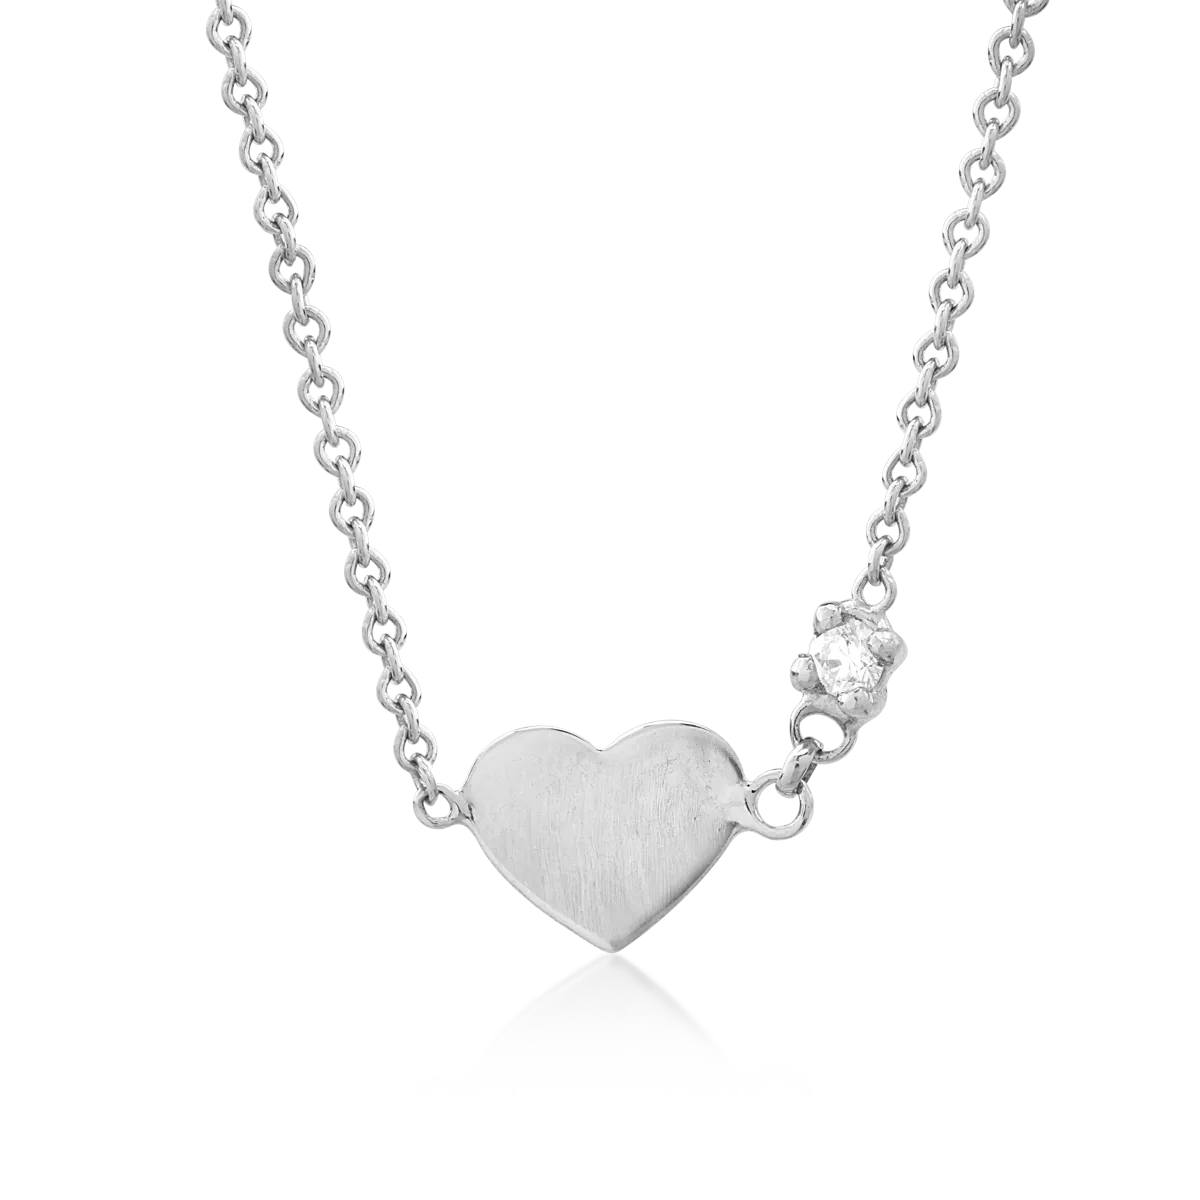 18K white gold heart children's pendant necklace with 0.02ct diamond